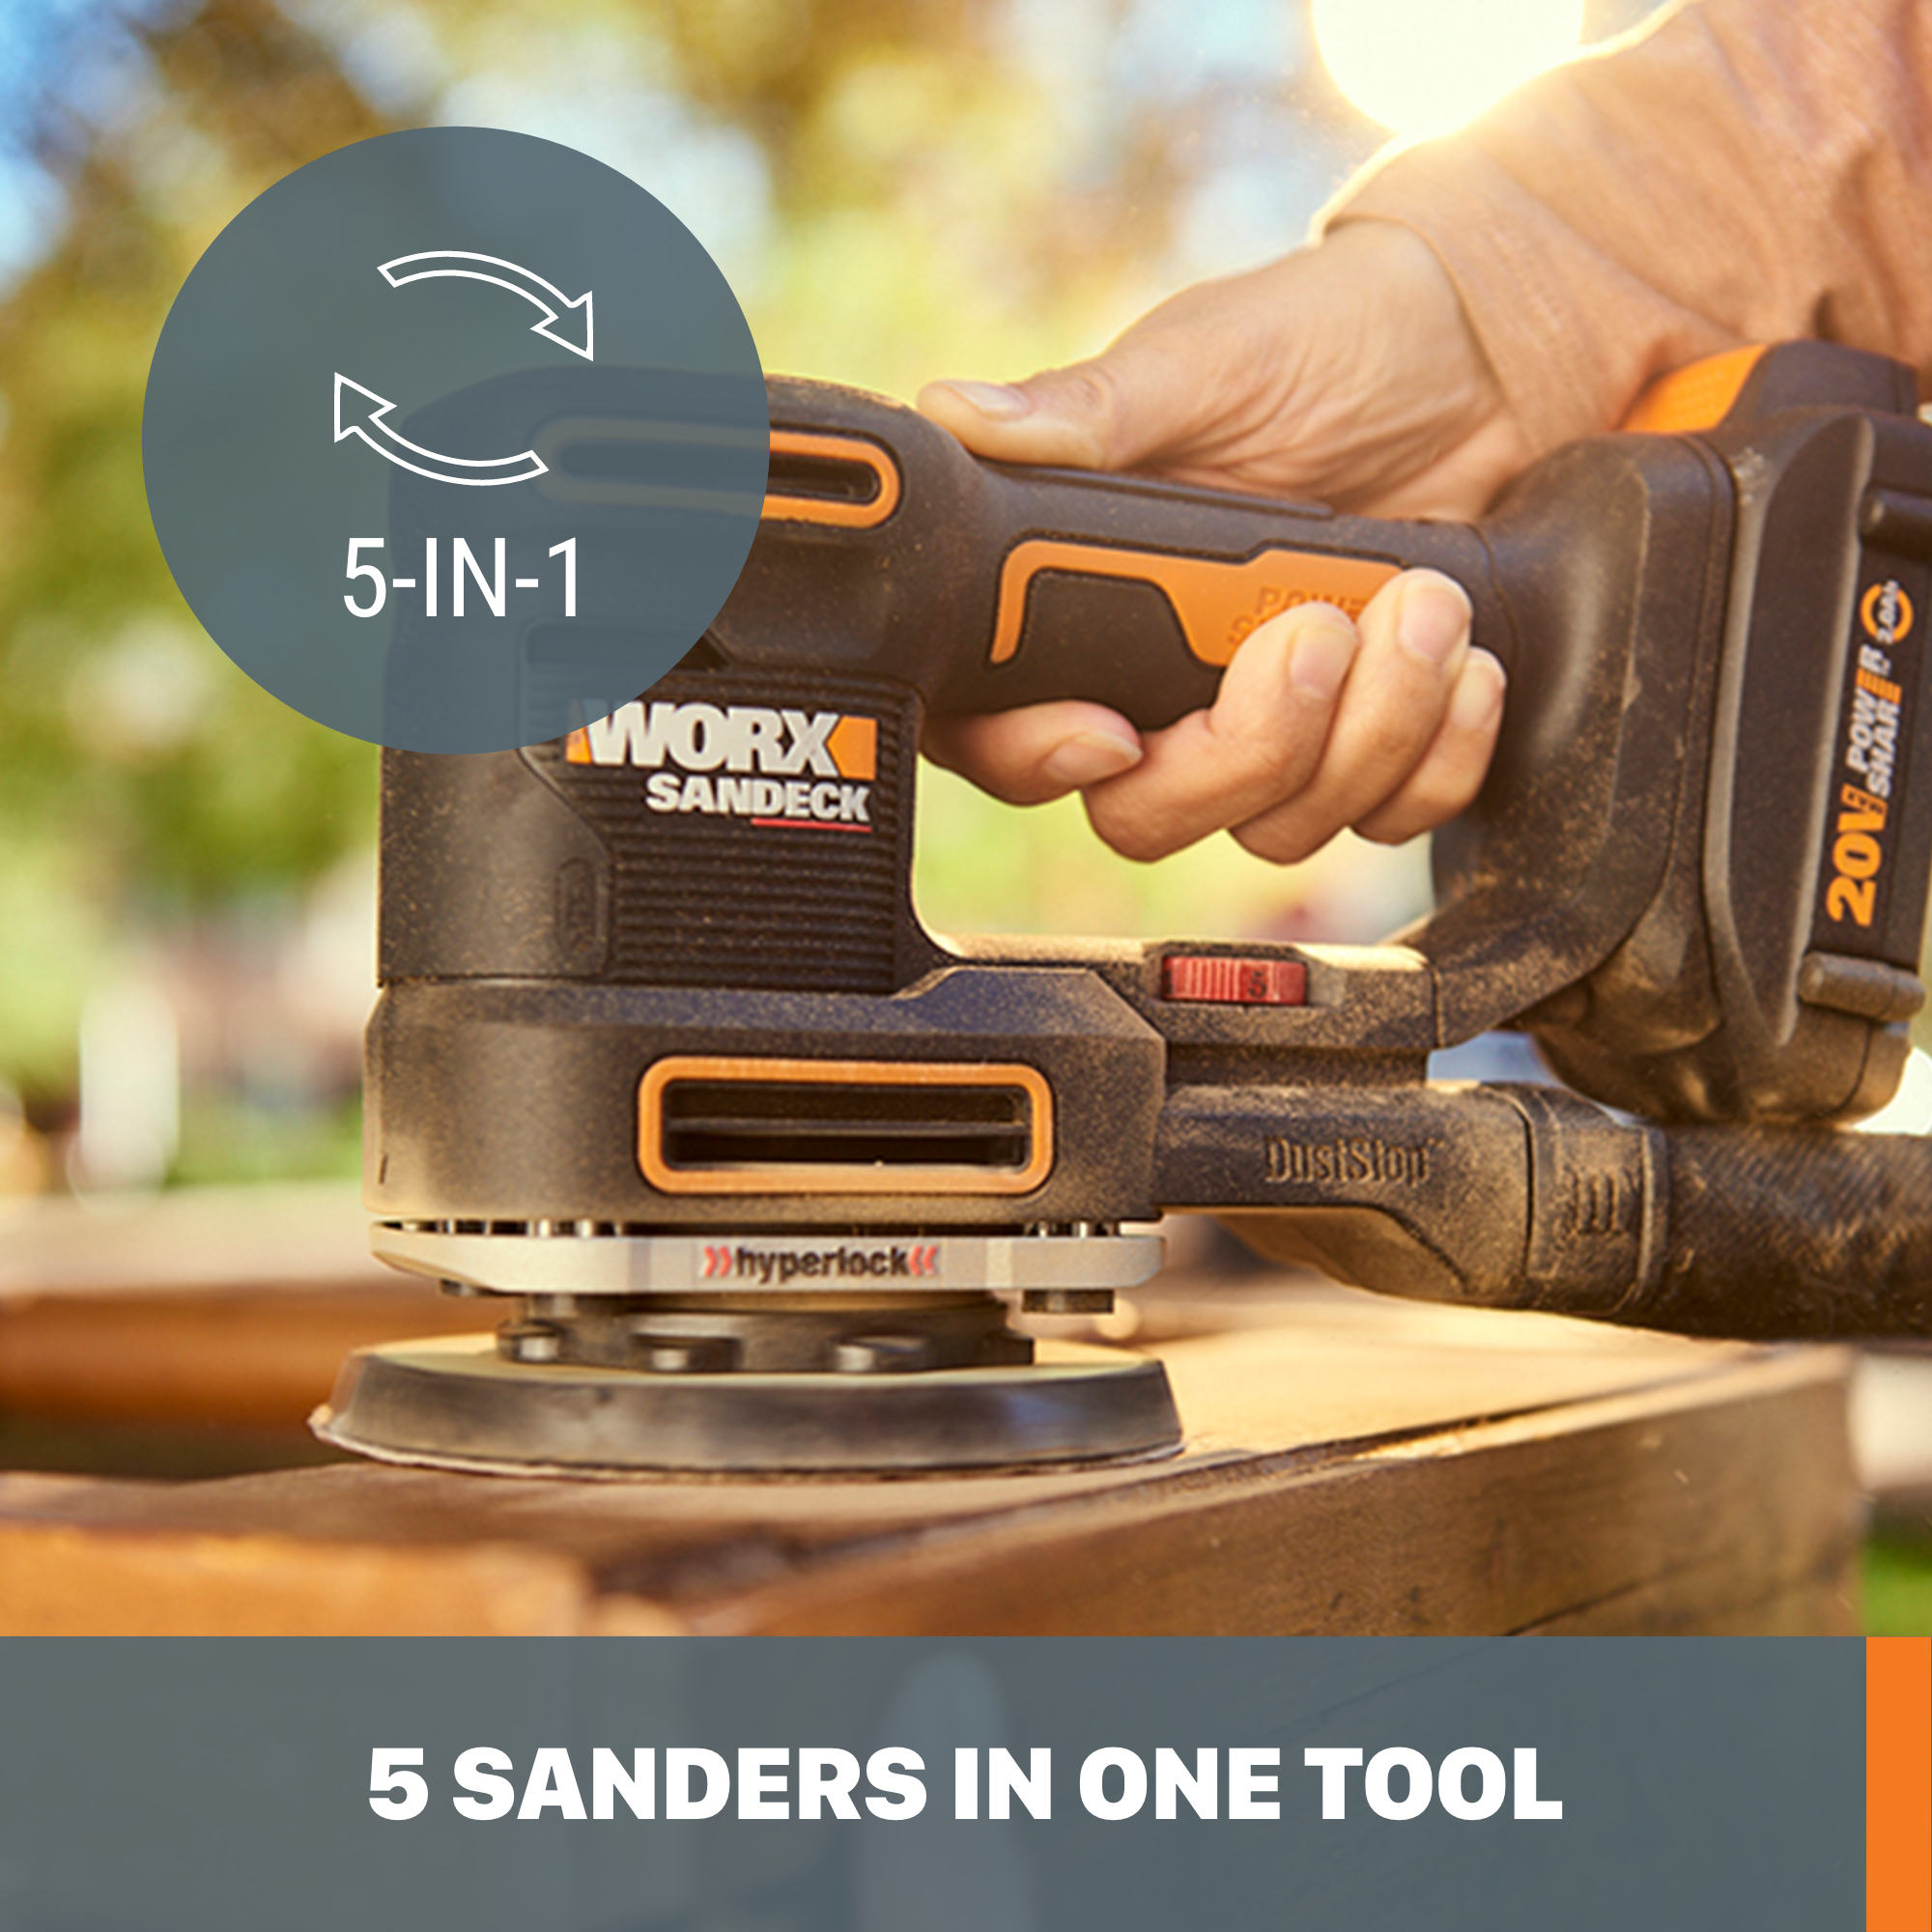 Worx WX820L.9 20V Power Share Sandeck 5-in-1 Cordless Multi-Sander (Tool Only) - image 5 of 6